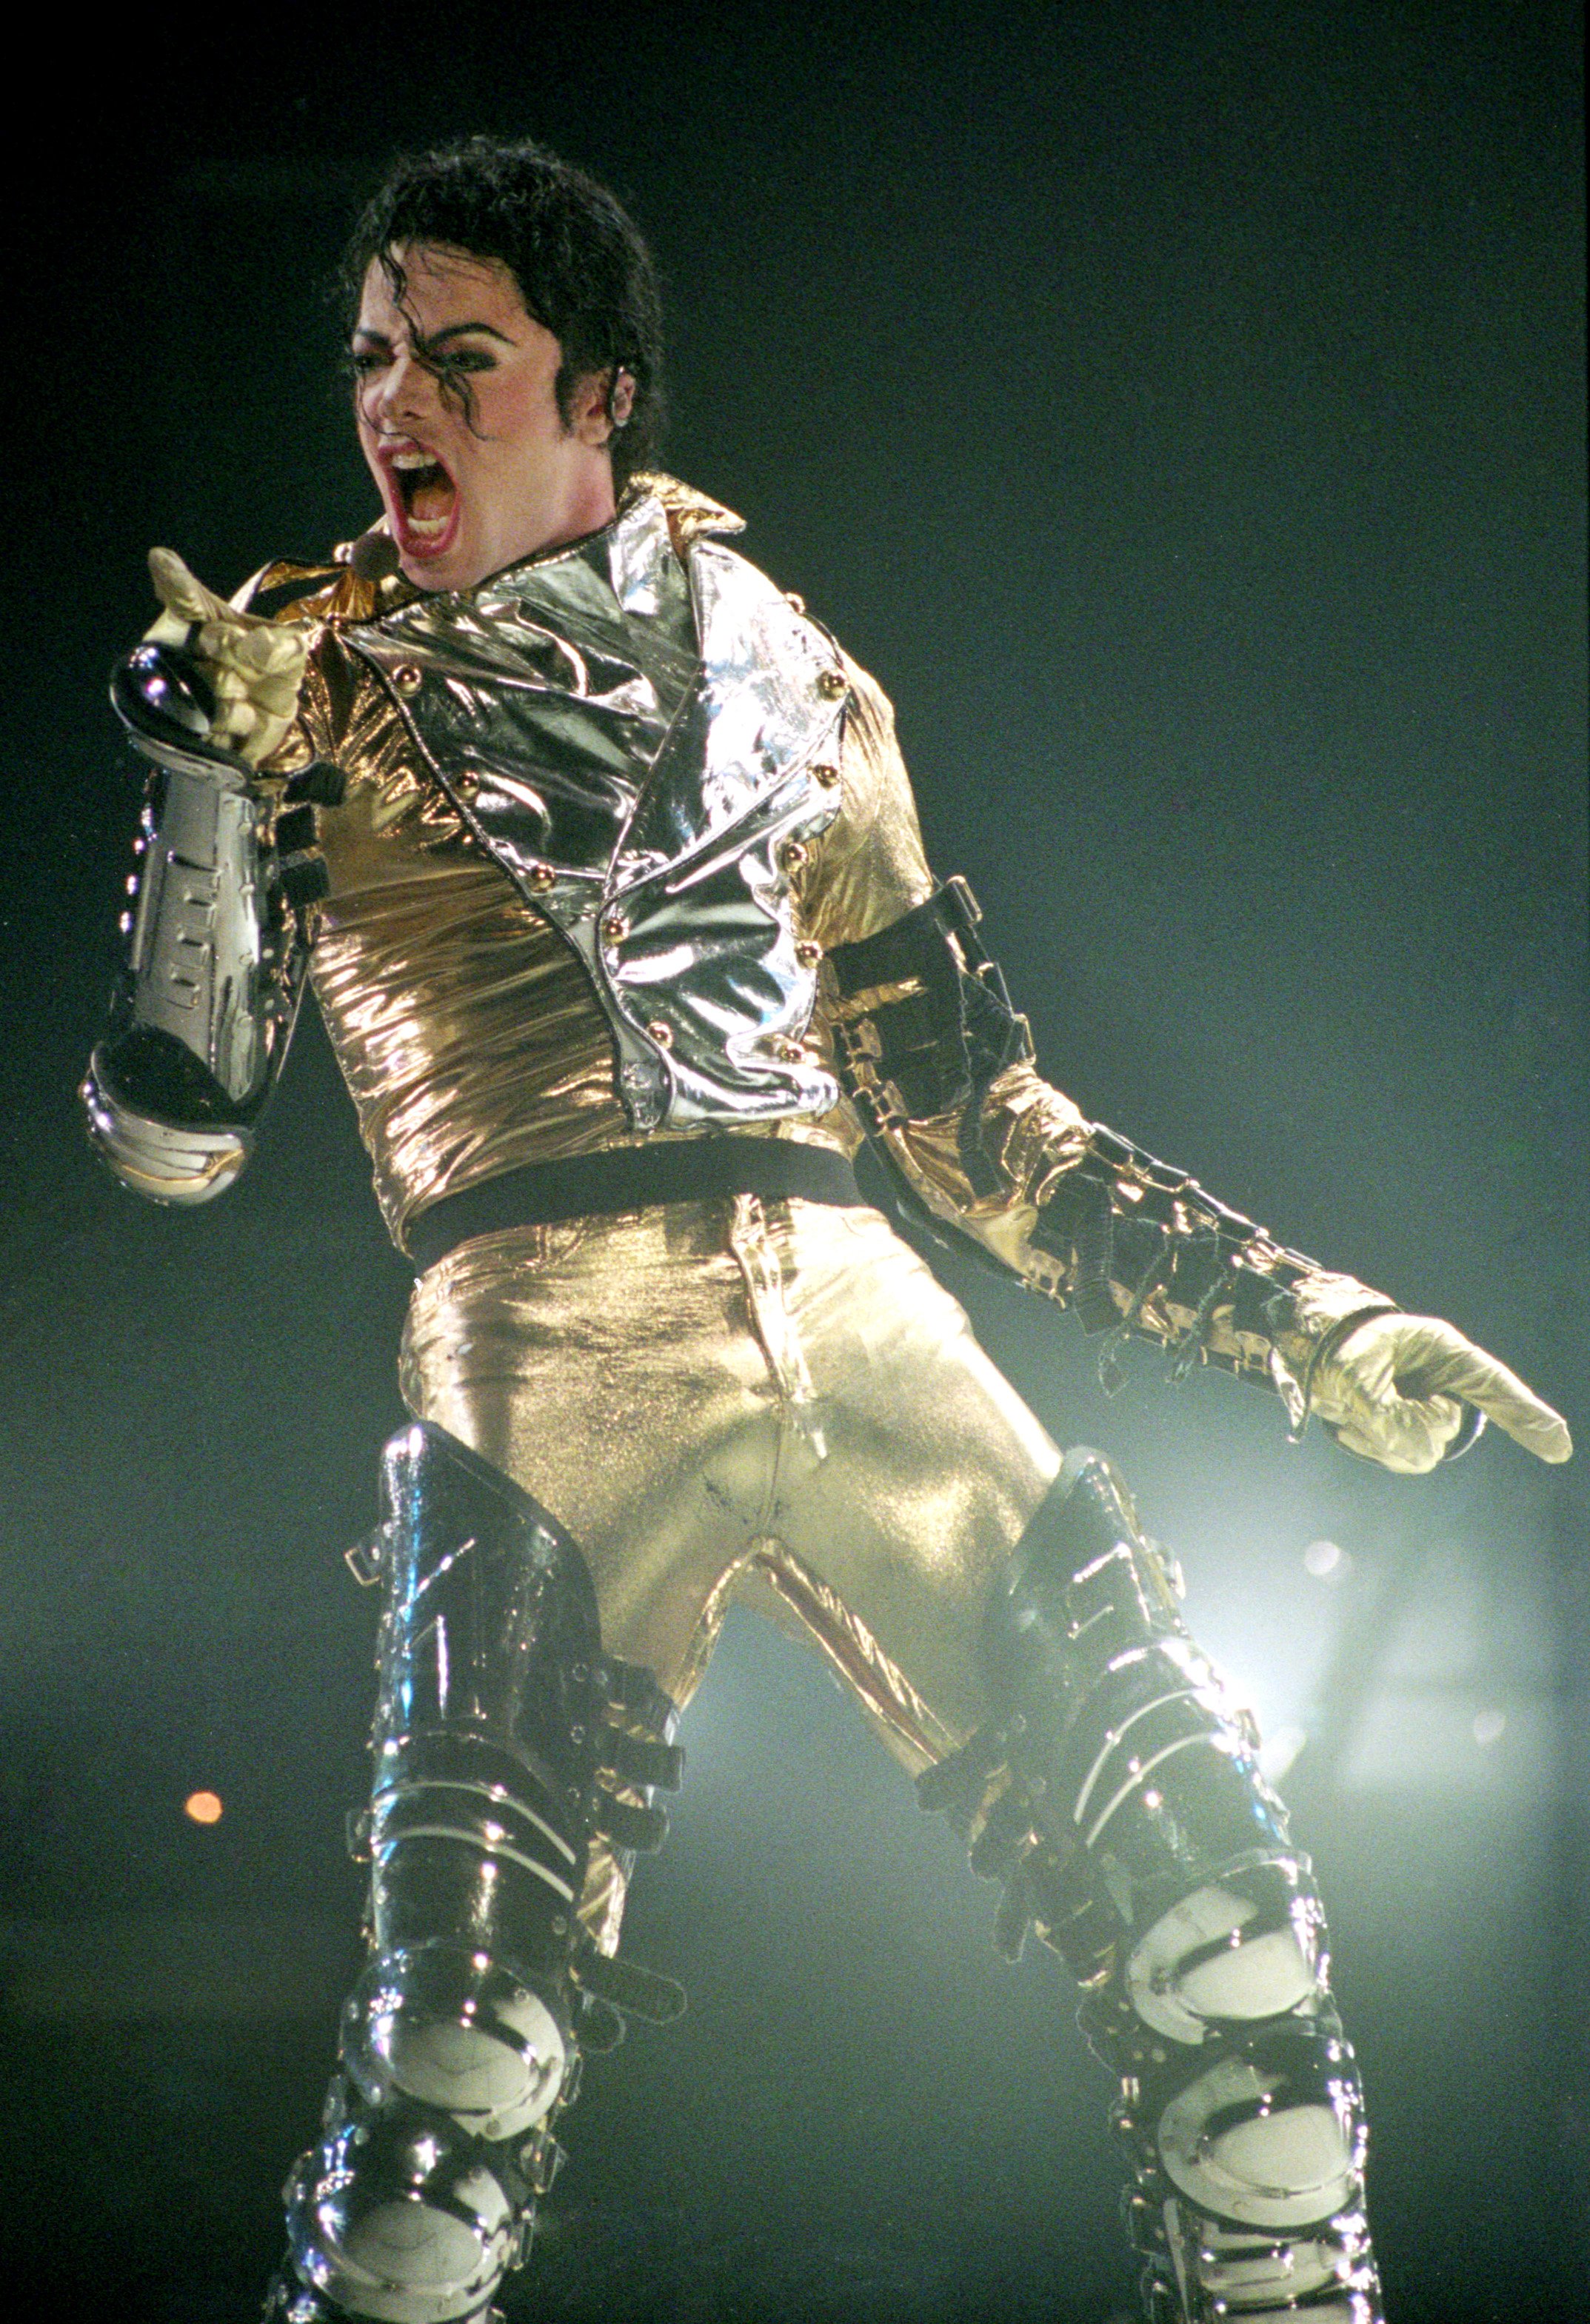 Michael Jackson performs on stage during is "HIStory" world tour concert on November 10, 1996, in Auckland, New Zealand. | Source: Getty Images.